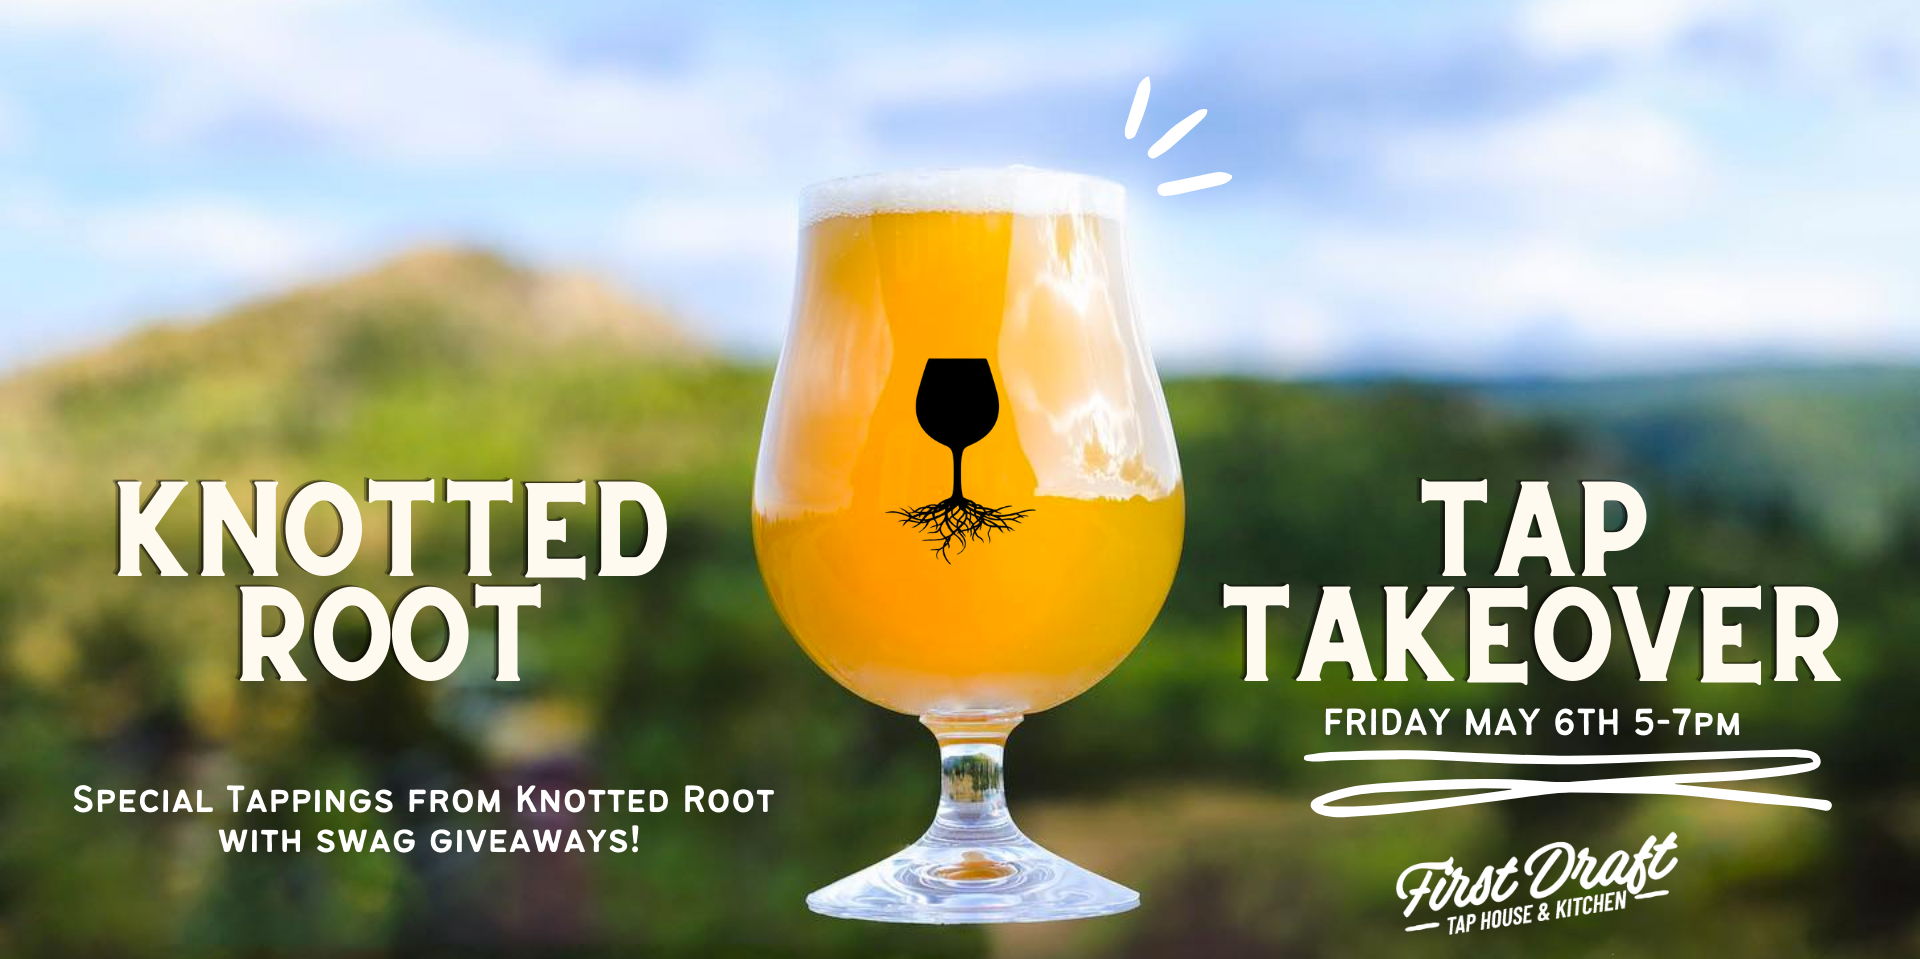 Knotted Root Tap Takeover promotional image